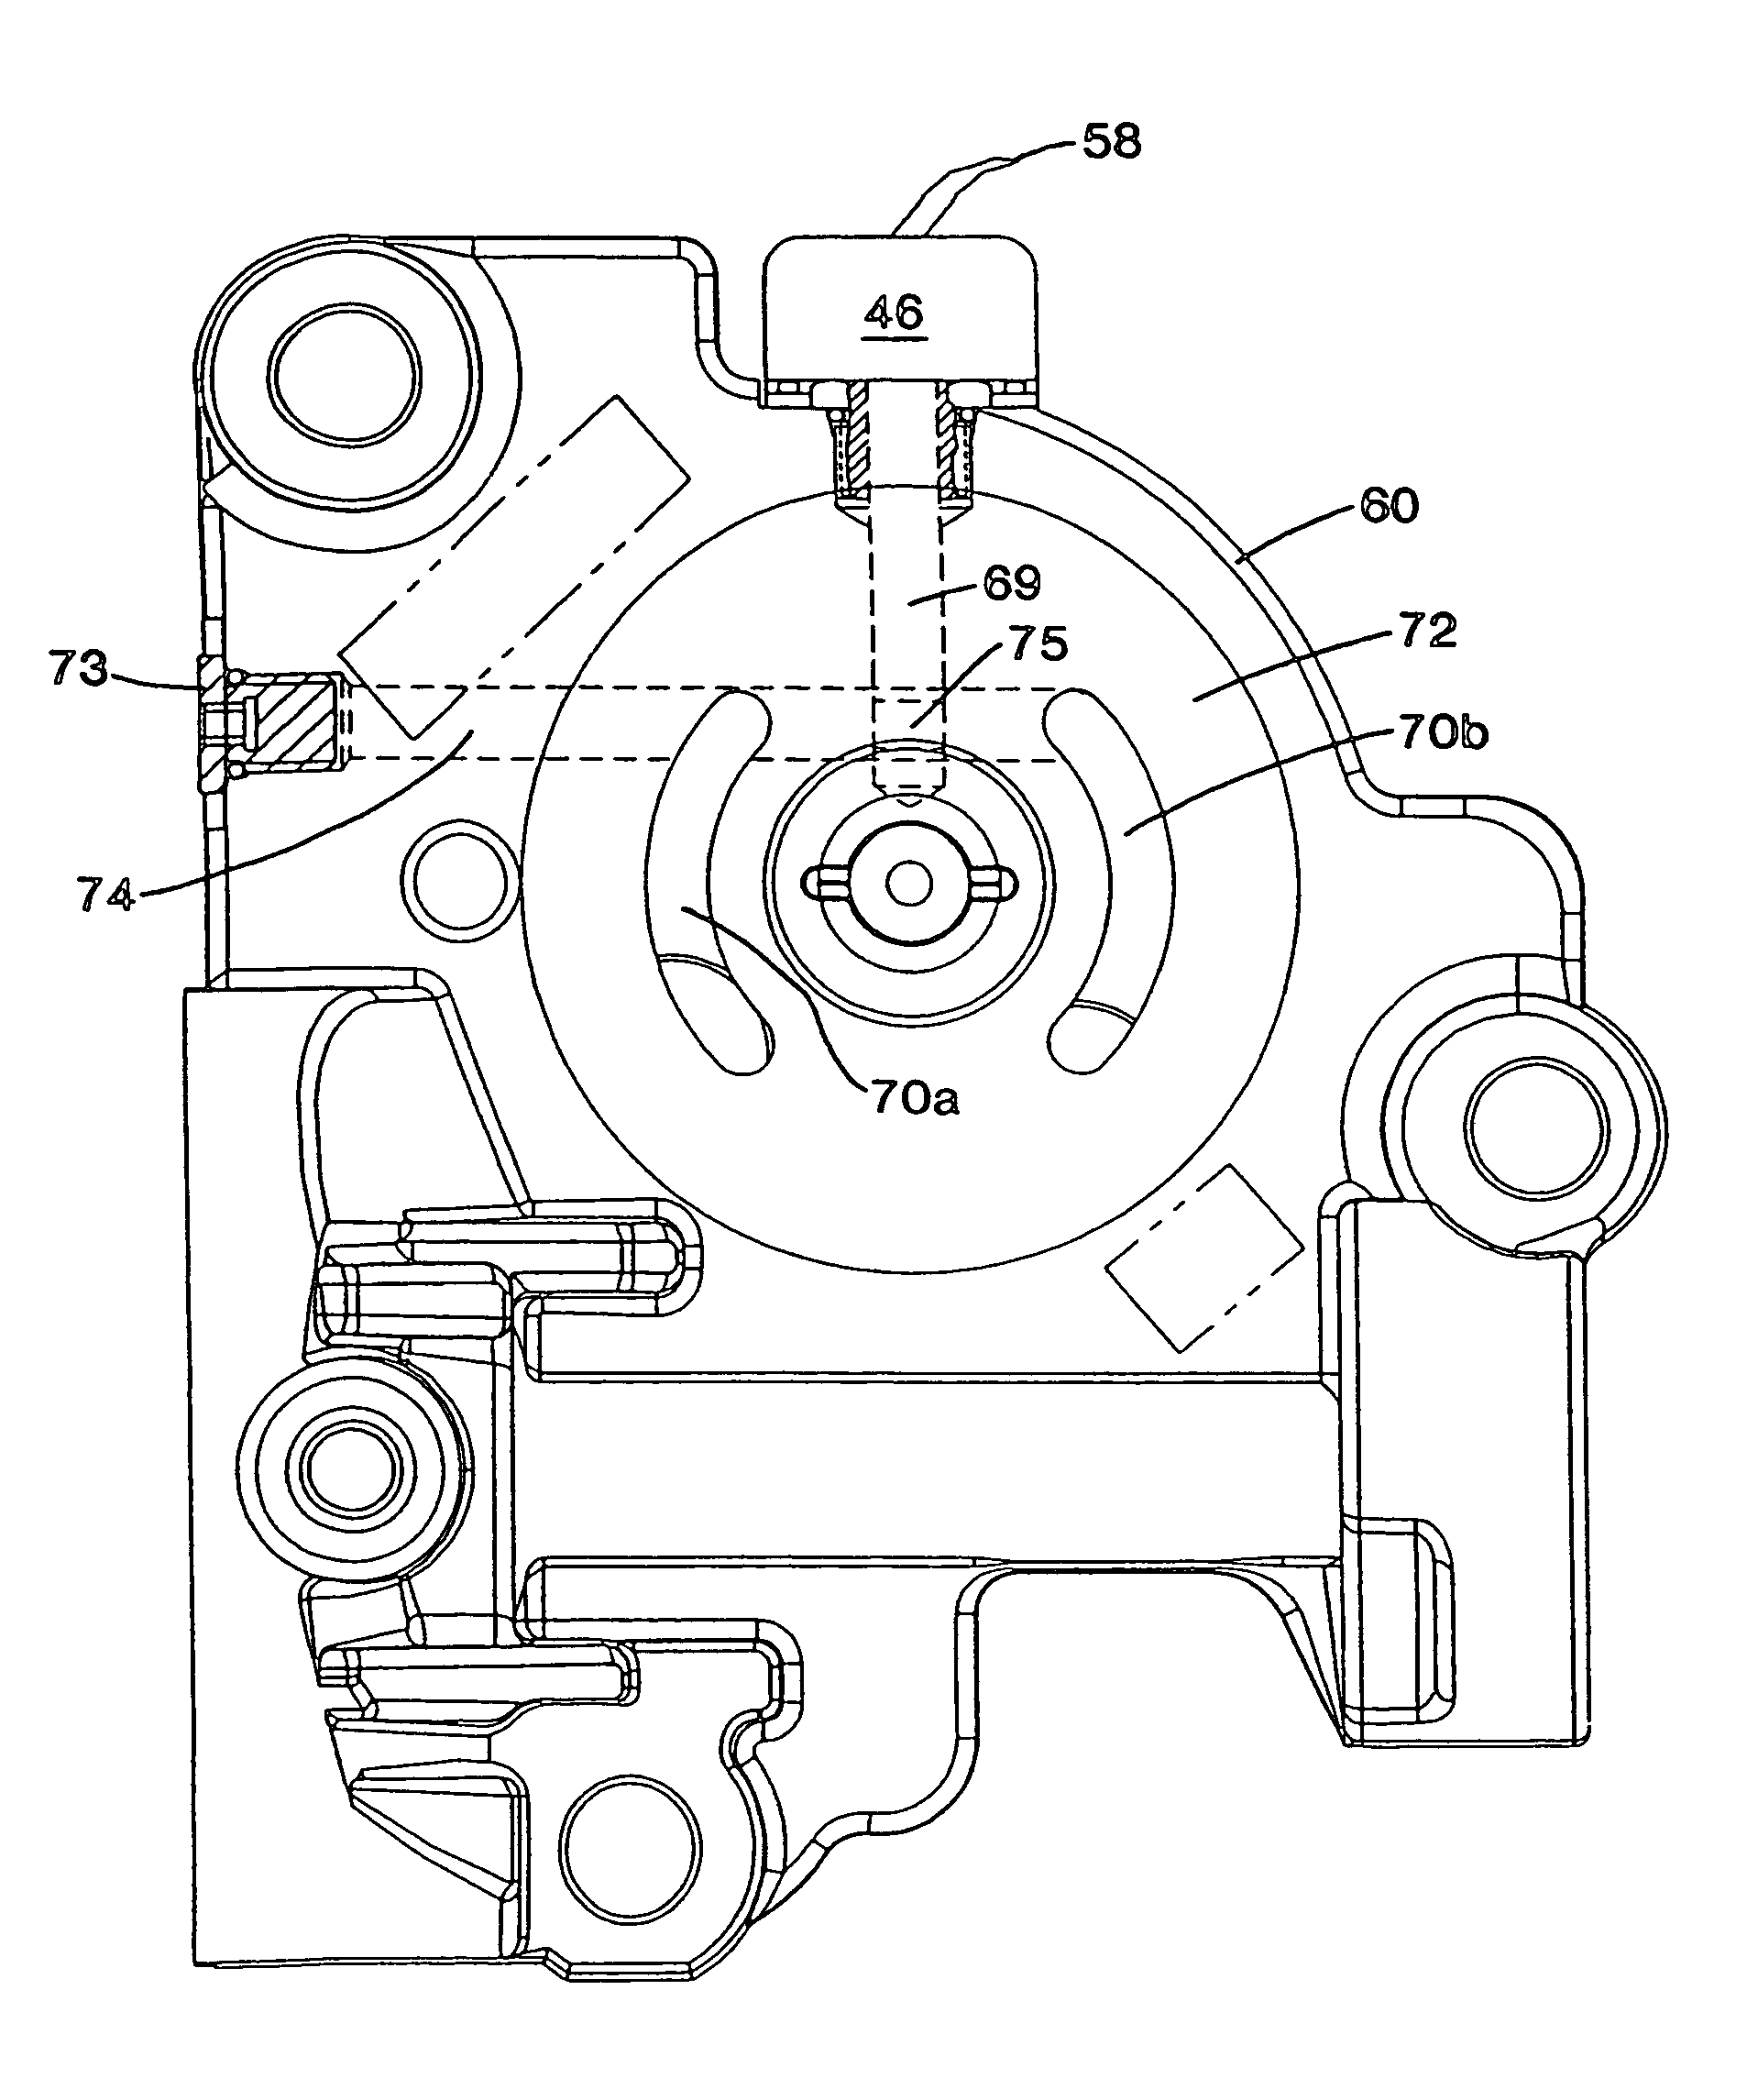 Bypass for a hydraulic device